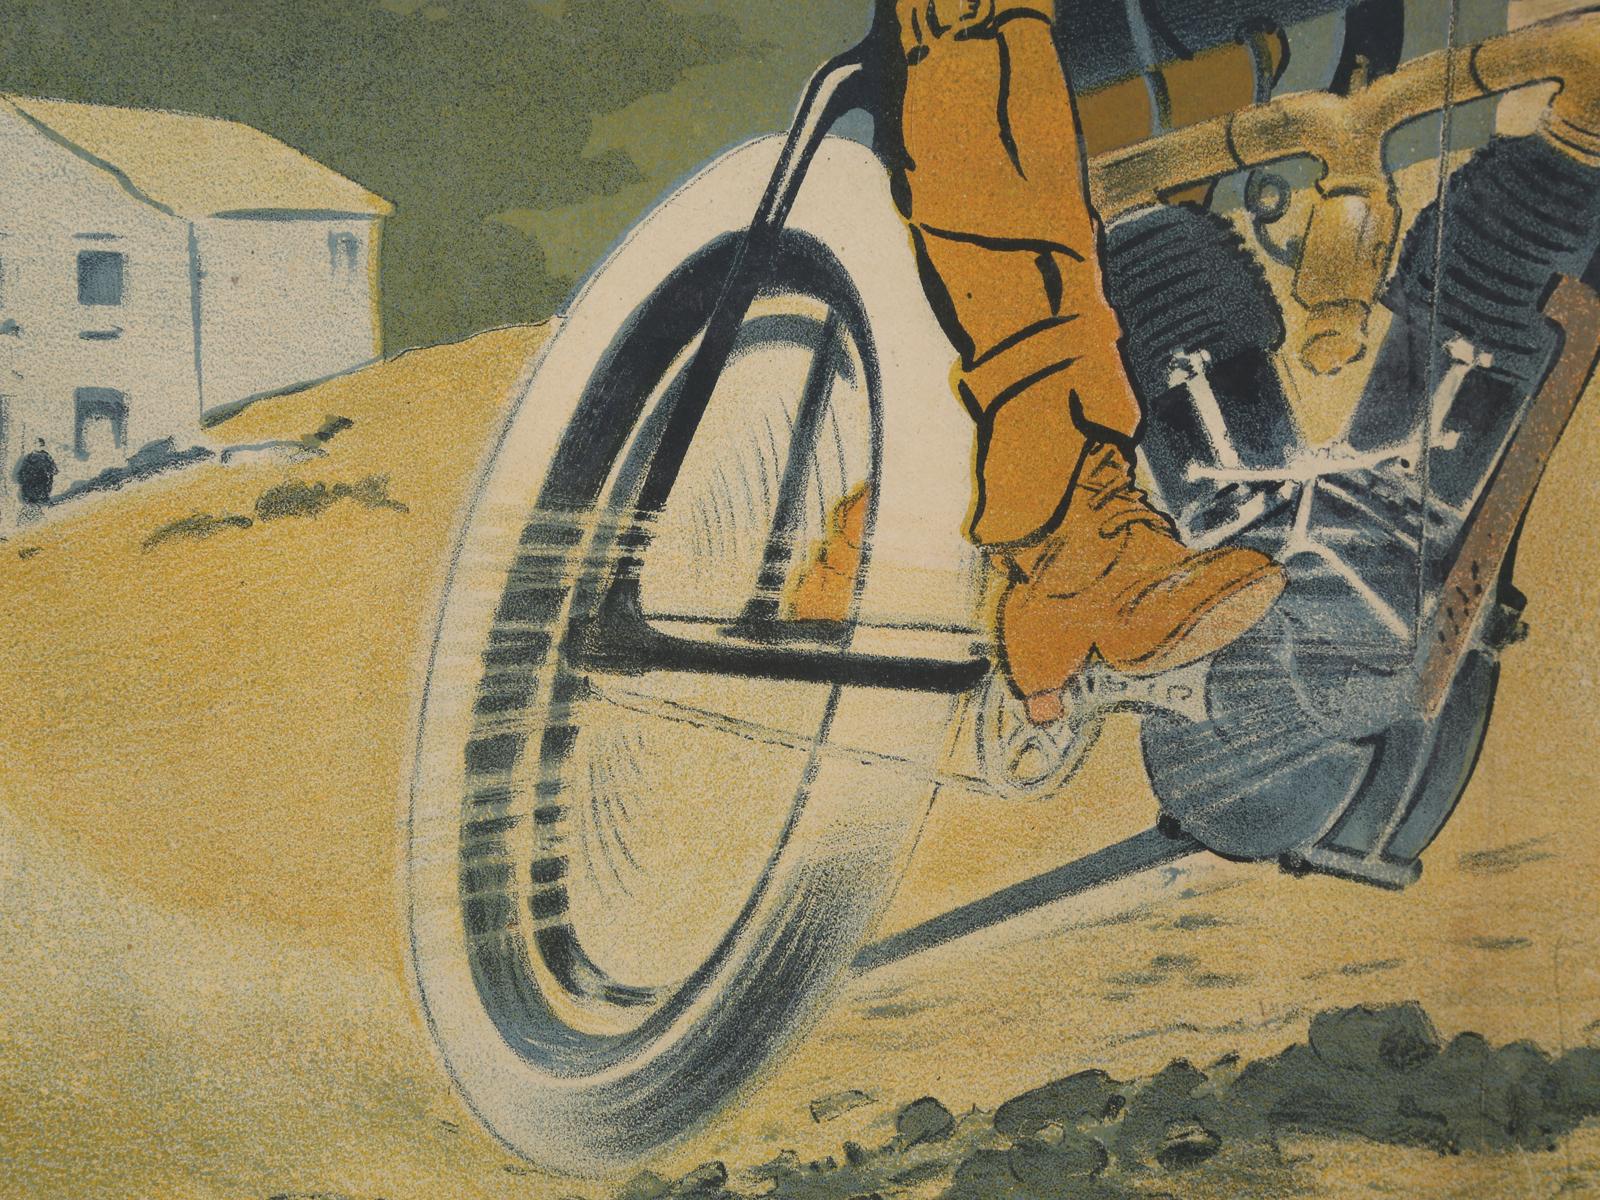 Paper Antique Griffon Motorcycle Racing Poster by Walter Thor, circa 1910